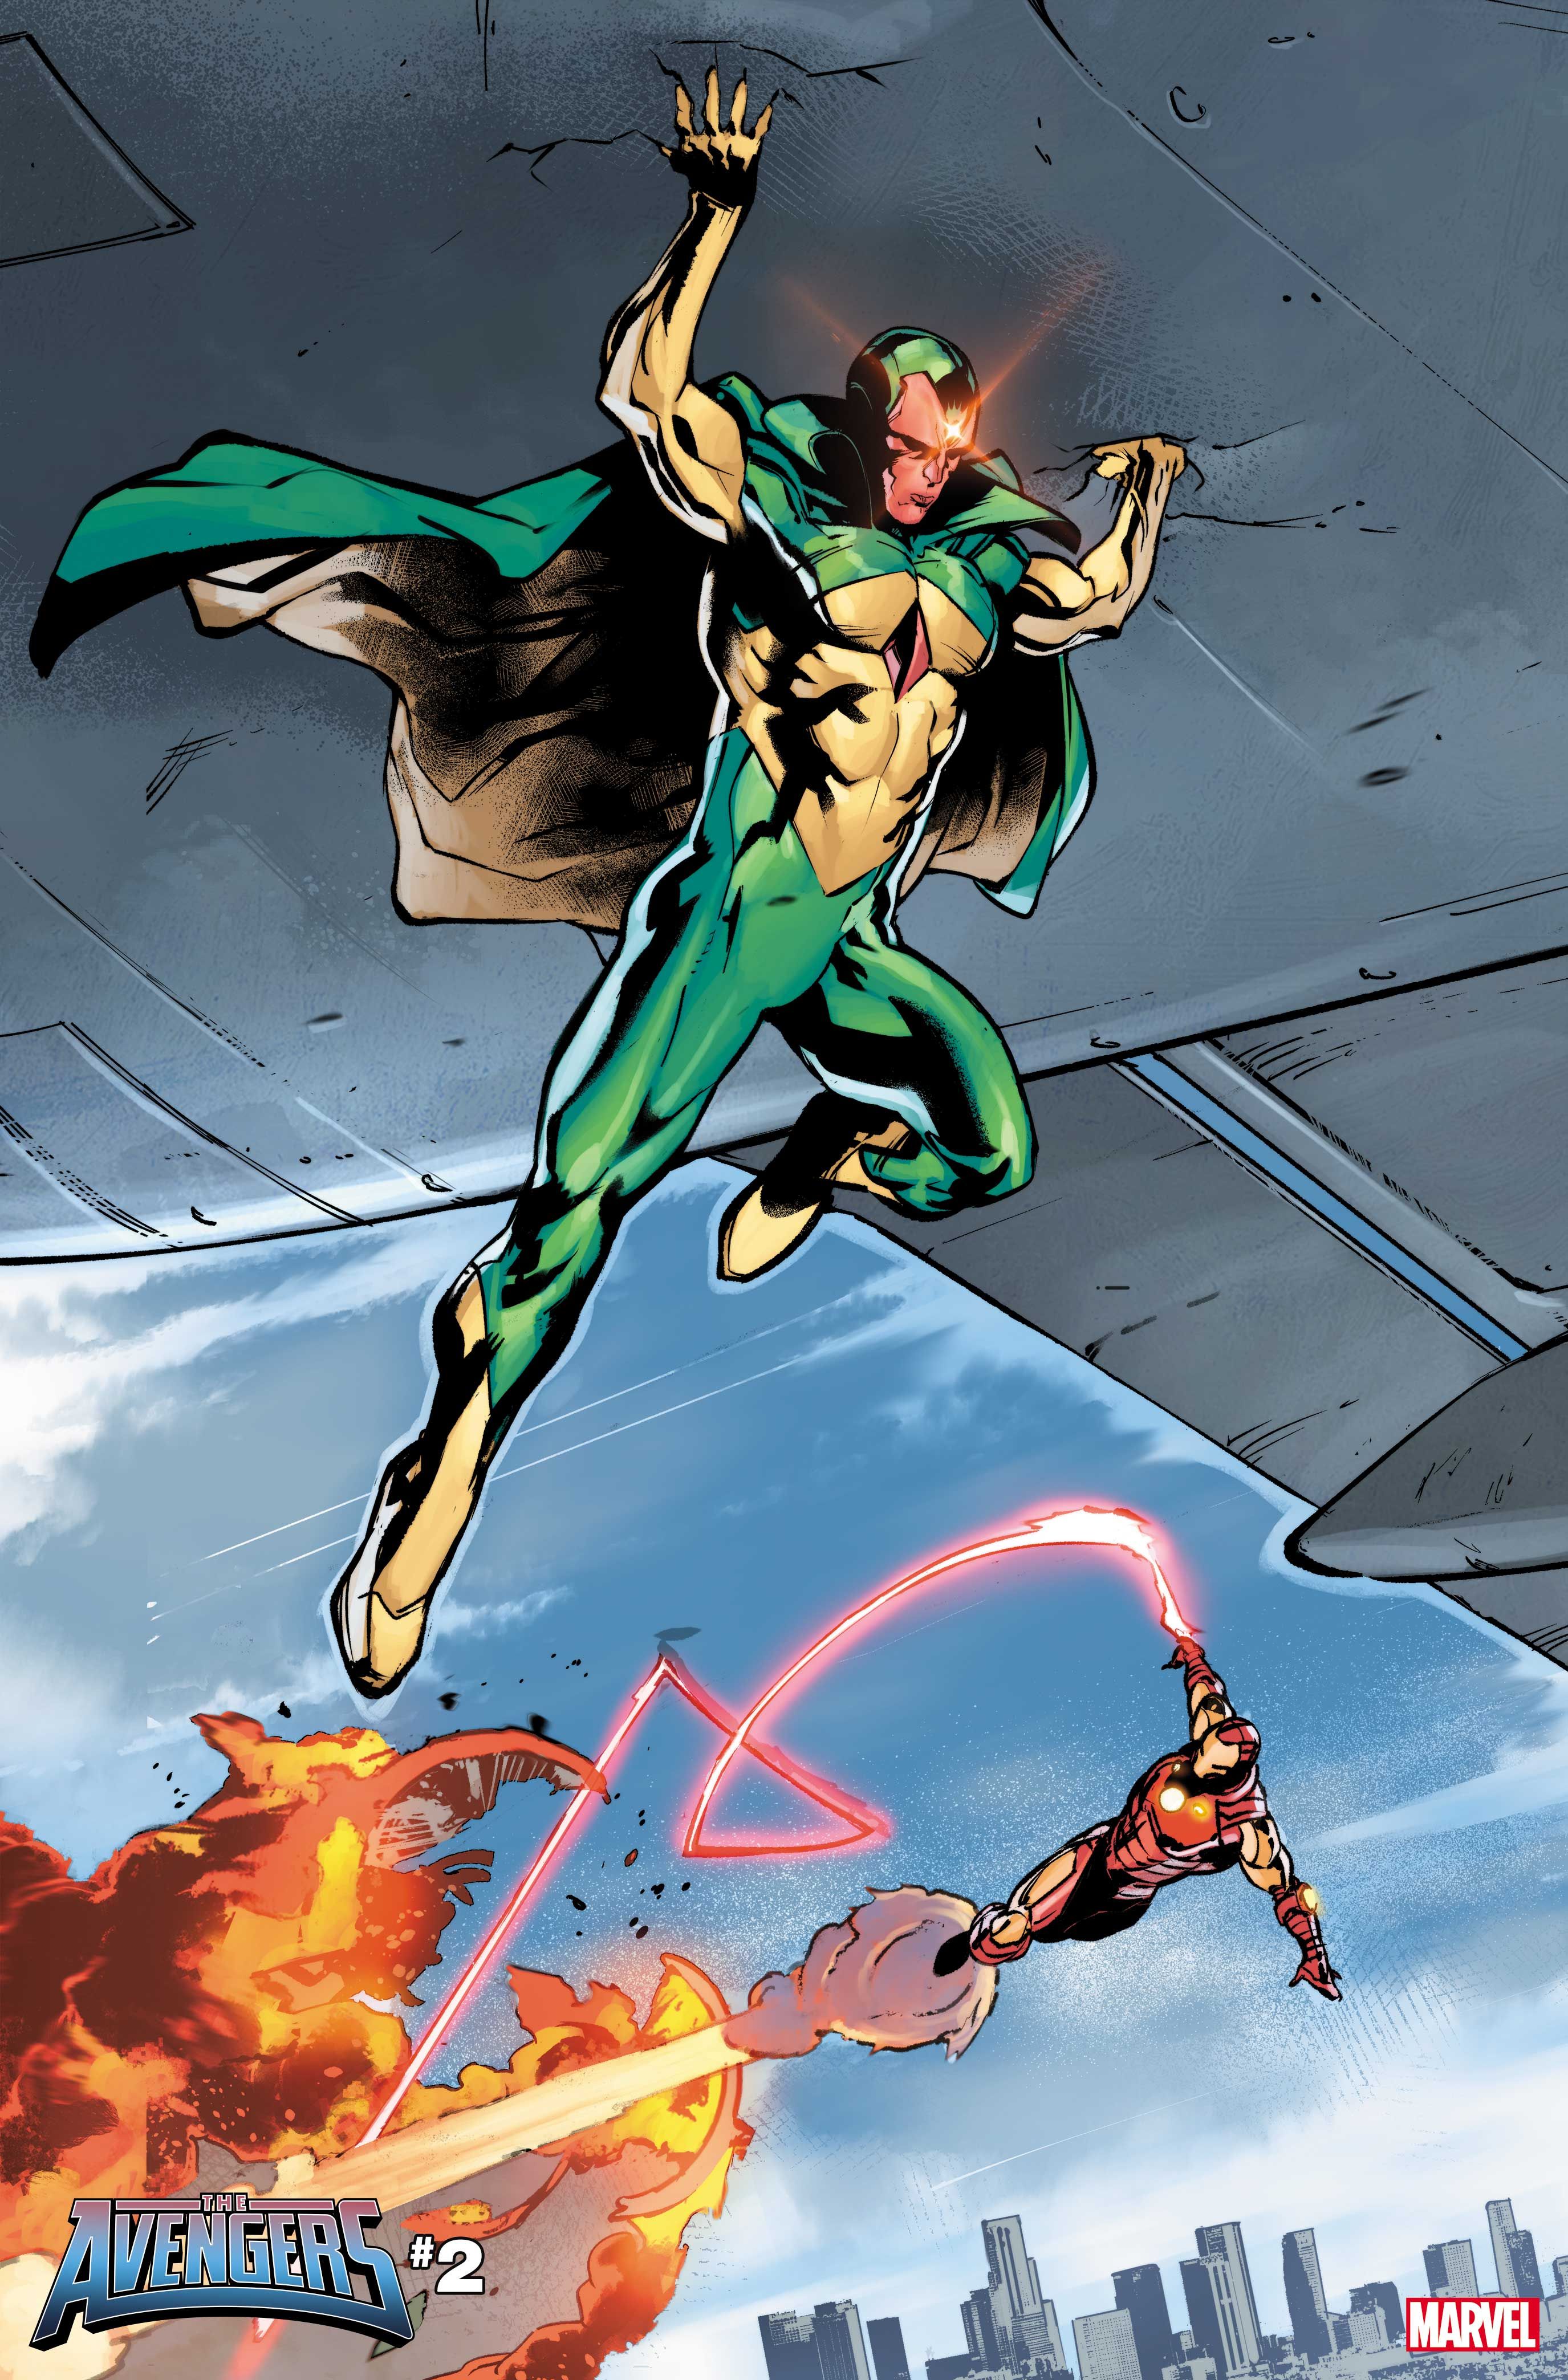 Vision and Iron Man fly under a plane in Avengers #2